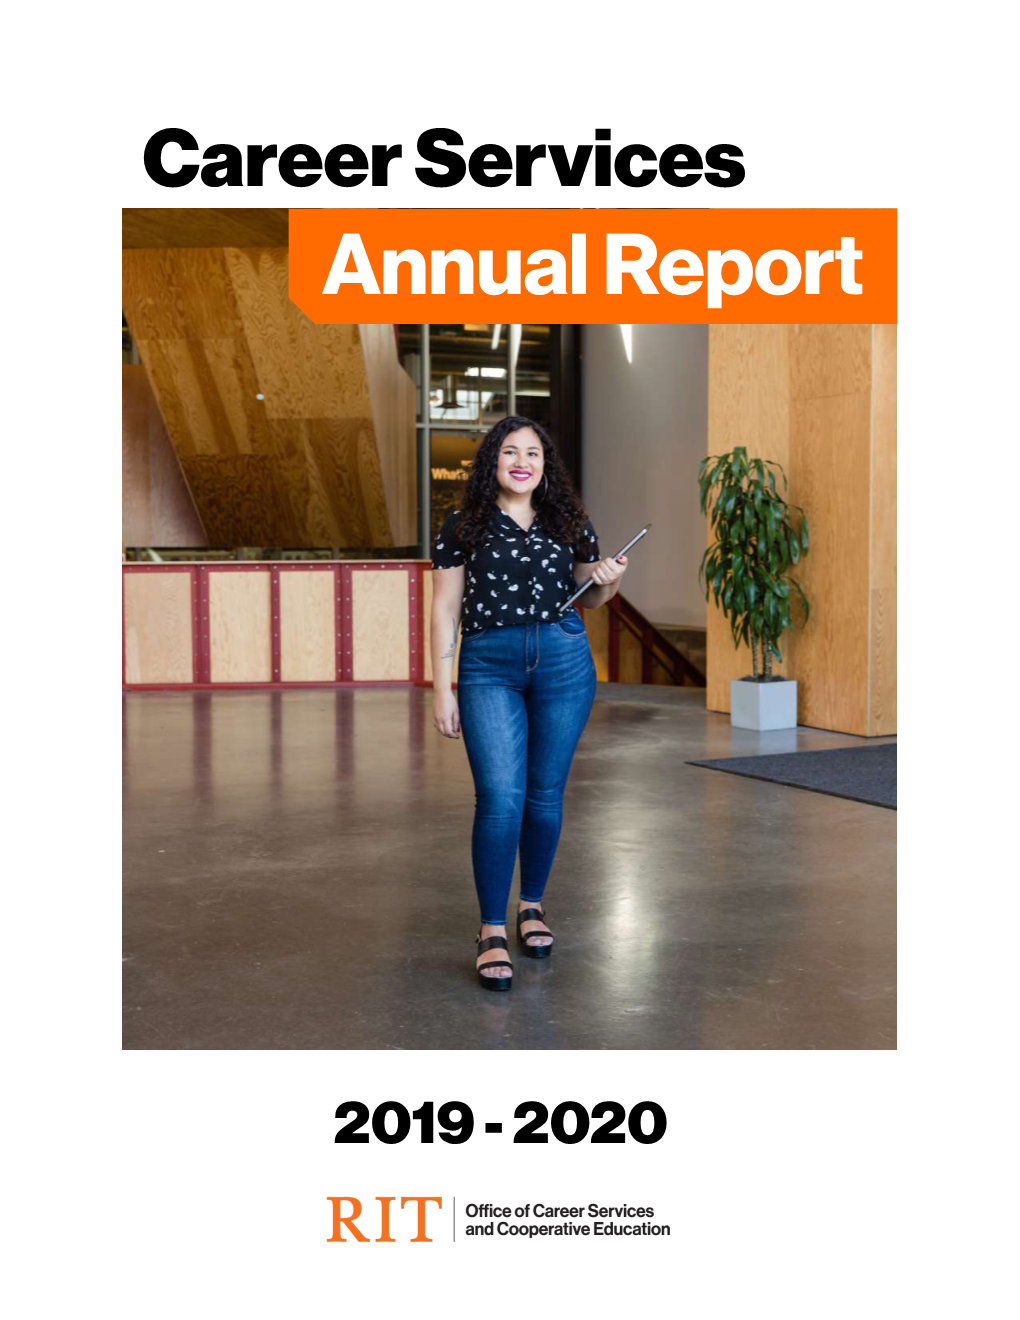 Career Services Annual Report 2019-2020